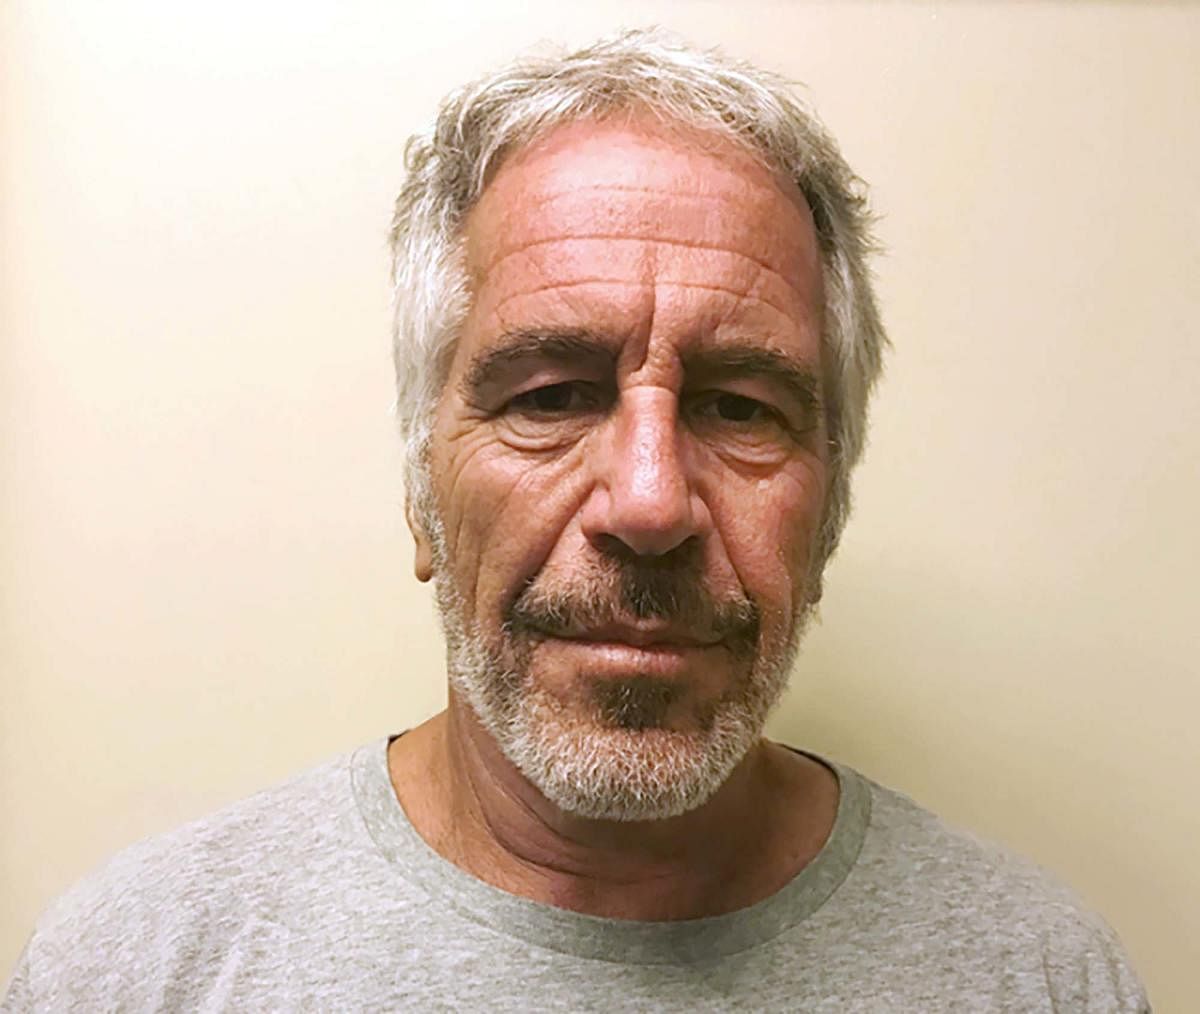 Epstein has died by suicide while awaiting trial on sex-trafficking charges, says person briefed on the matter. PTI Photo